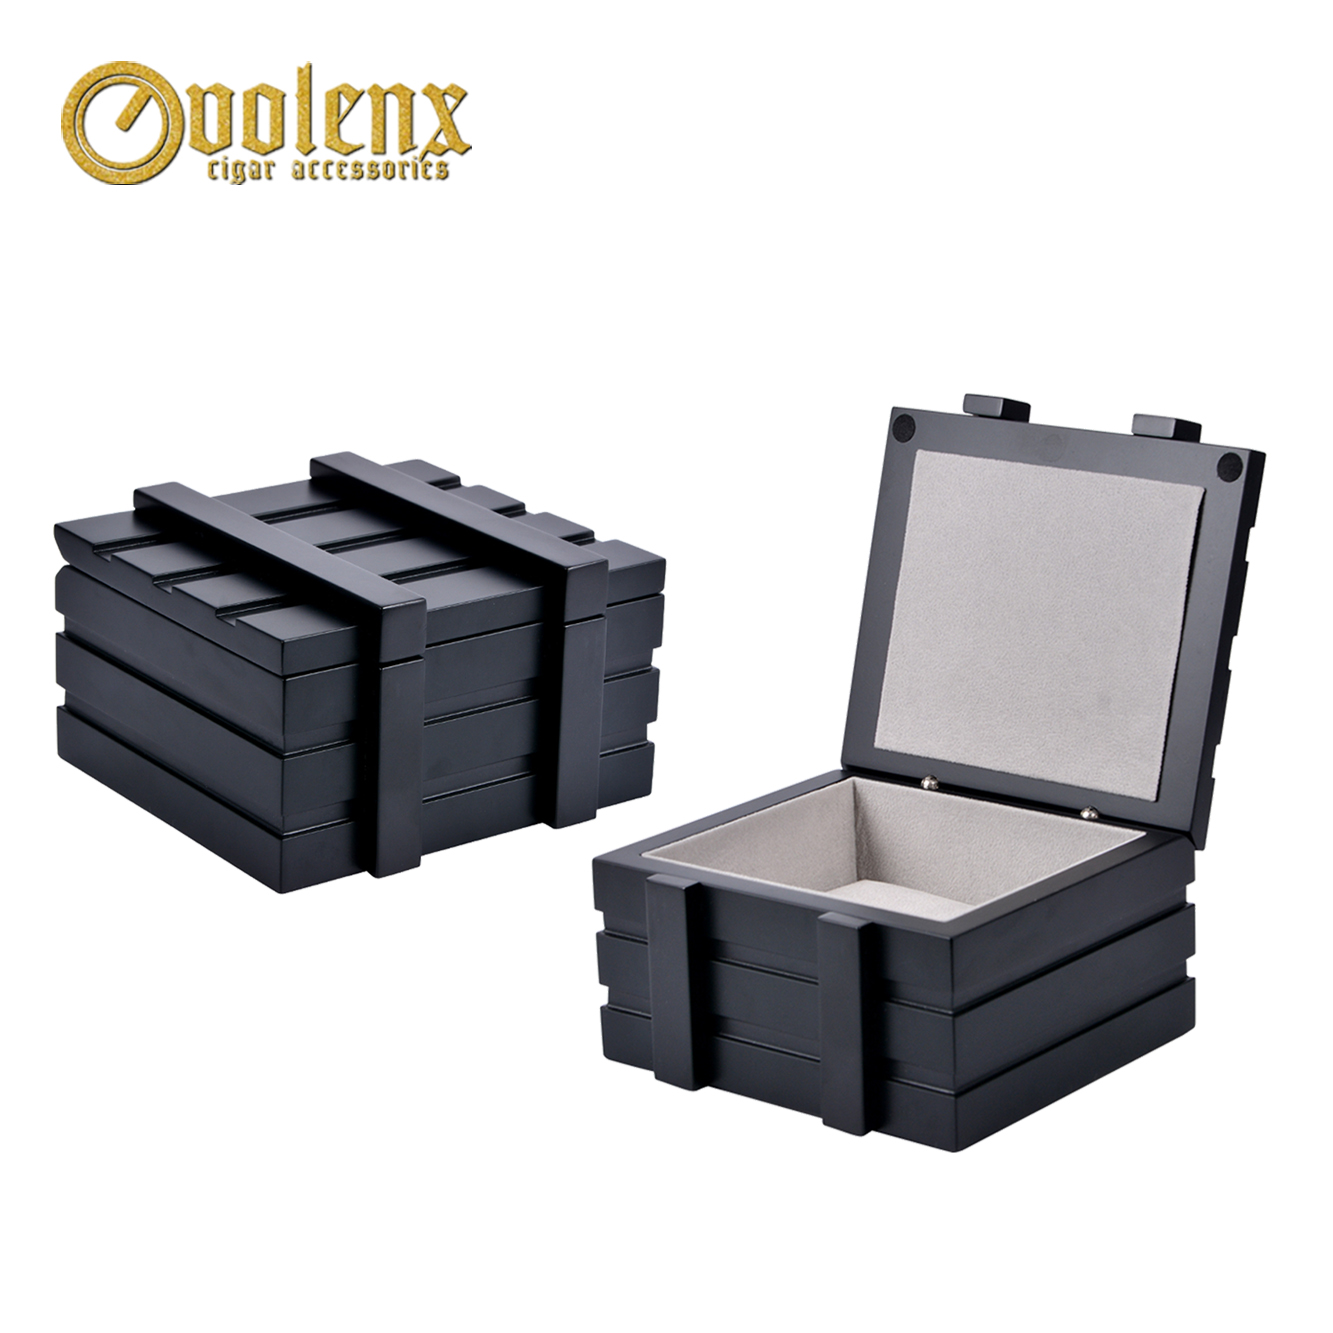  High Quality wooden watch box